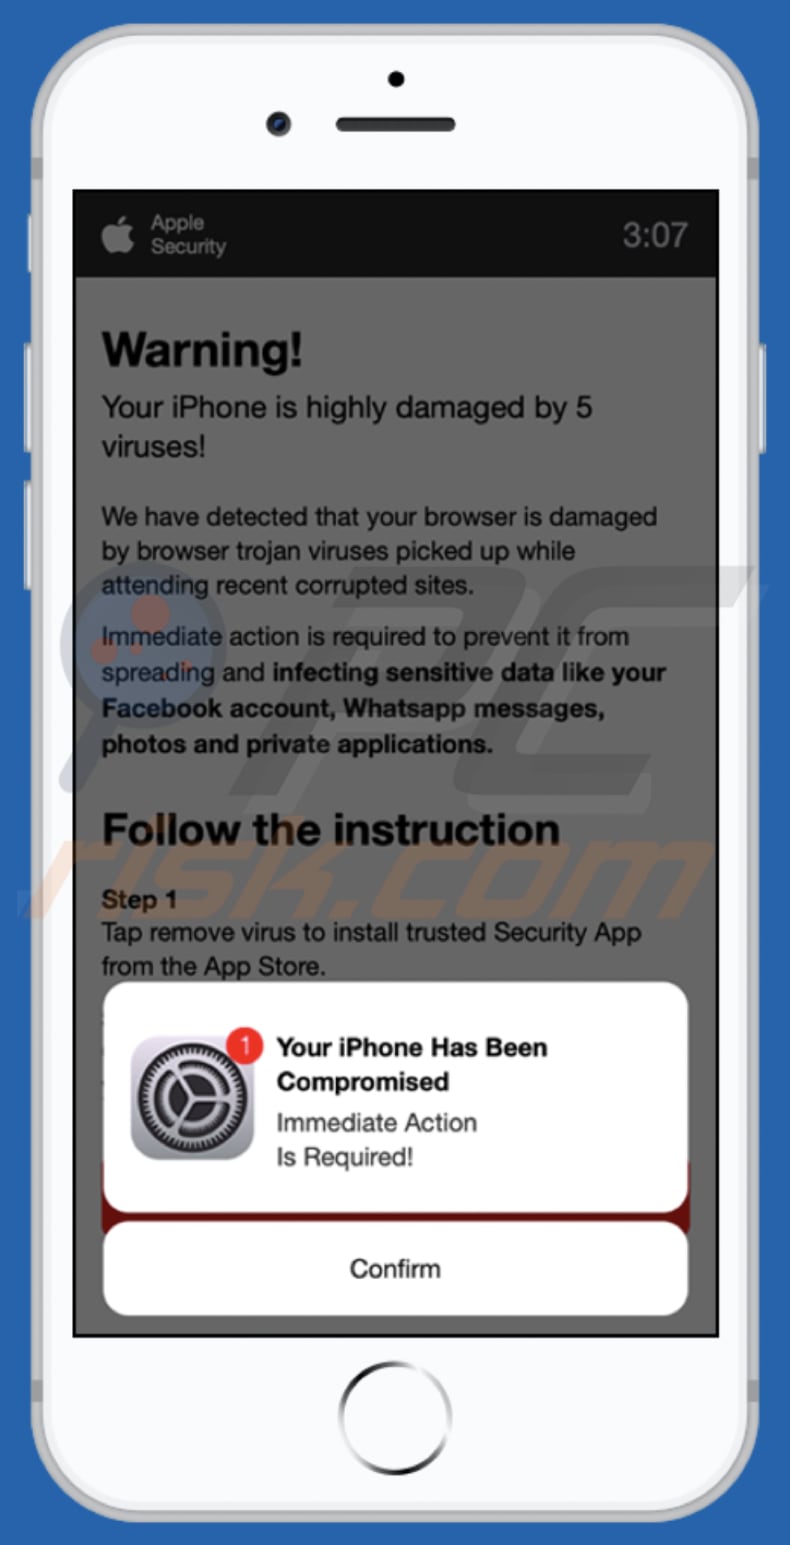 Your iPhone is highly damaged by 5 viruses! scam